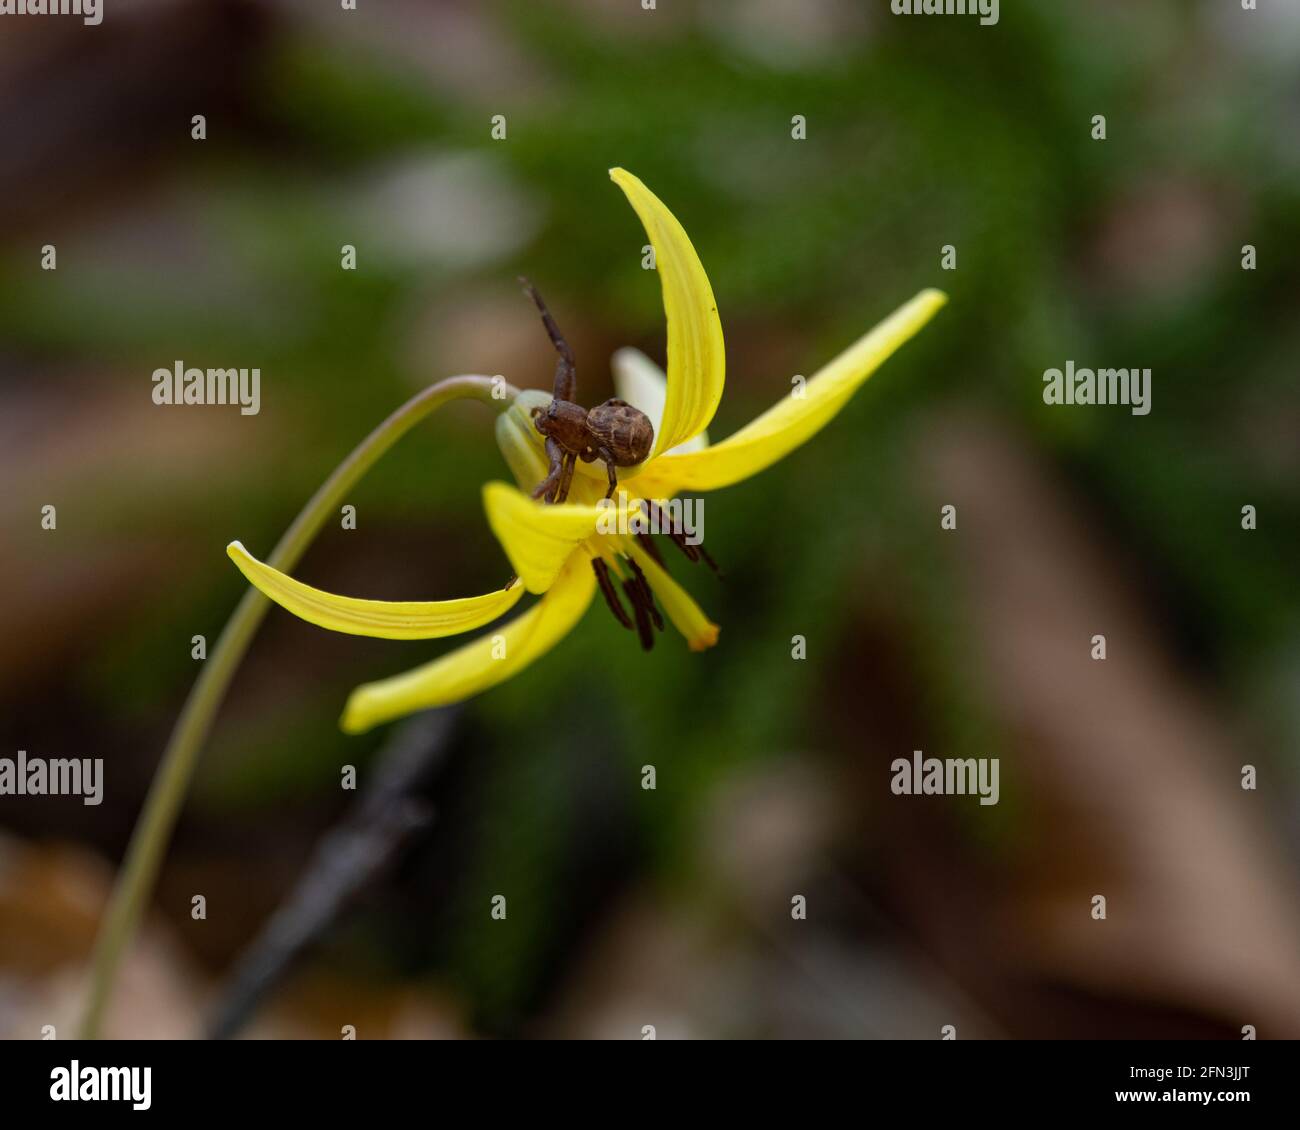 A flower spider sitting on a yellow trout lily flower, Erythronium americanum, growing in the Adirondack Mountains, NY wilderness in early spring Stock Photo